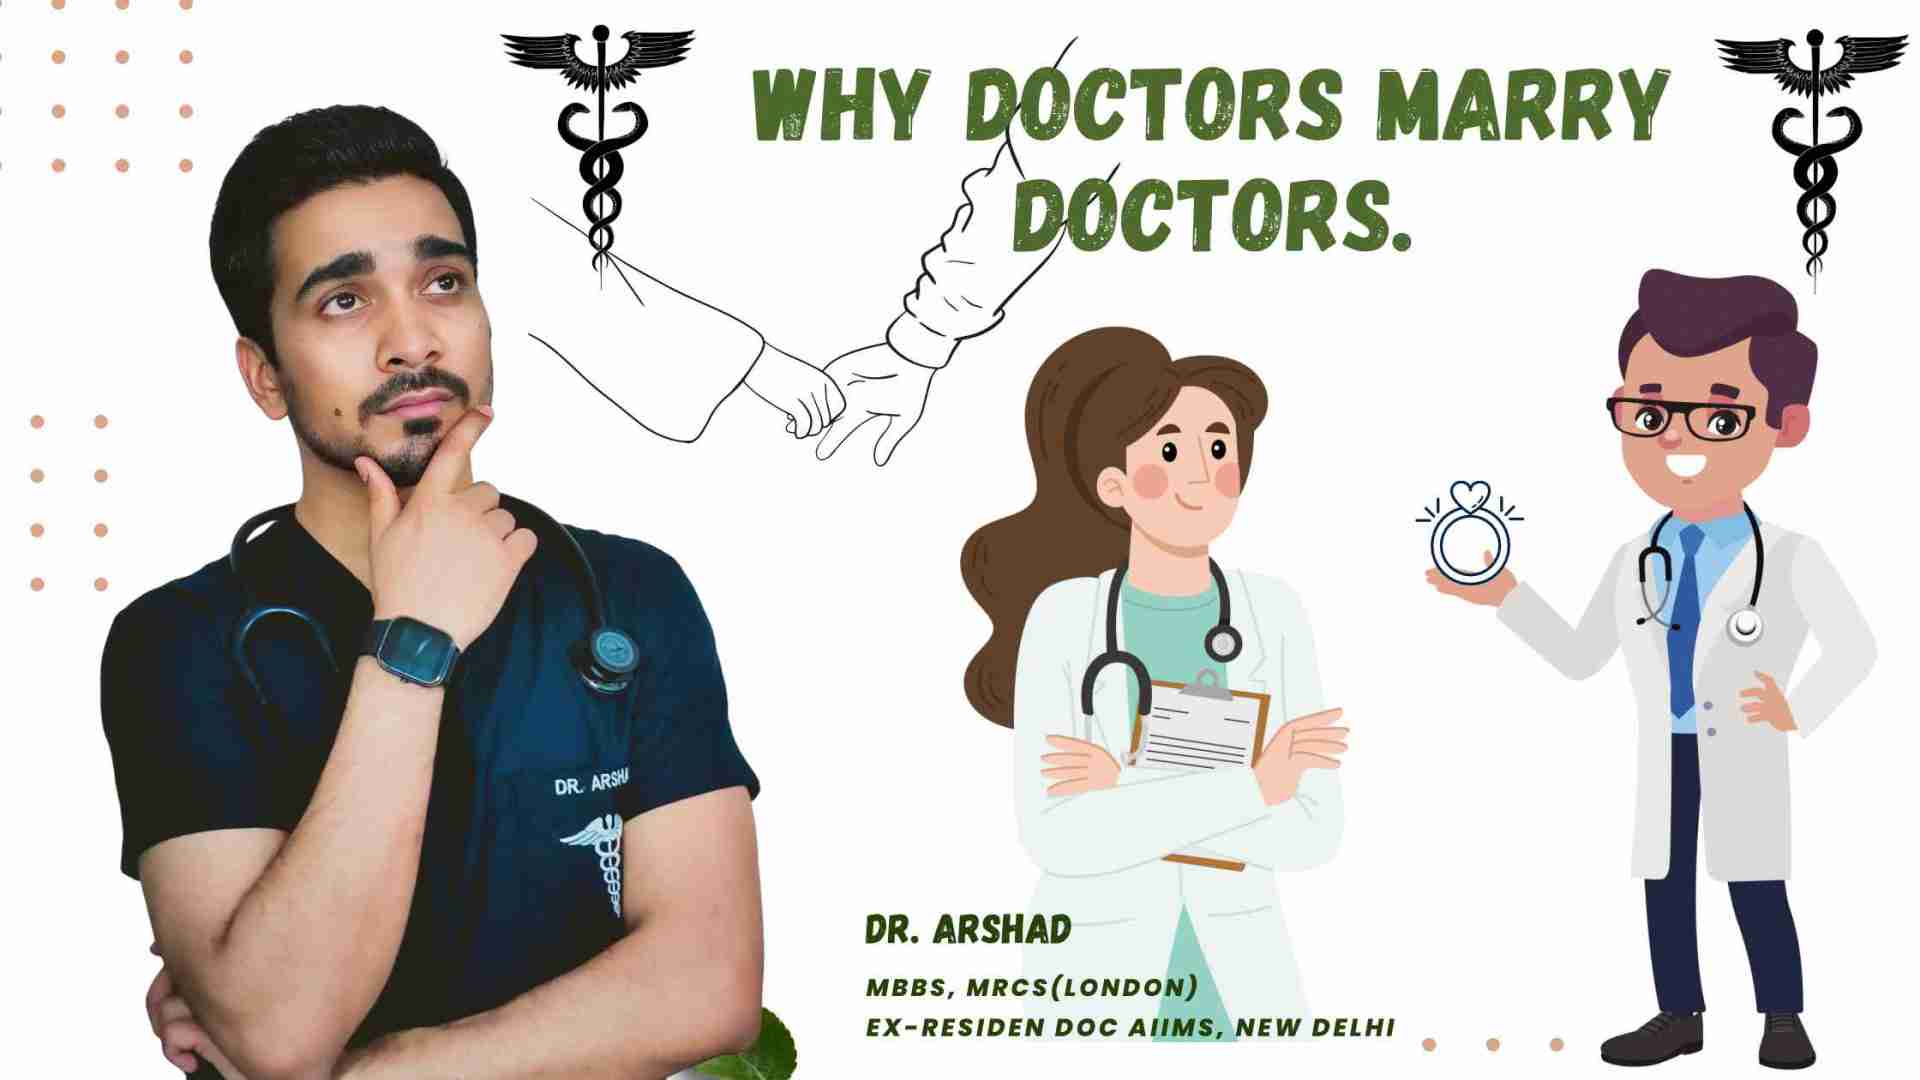 Why Doctors Marry Doctors Understanding The Reasons And Insights